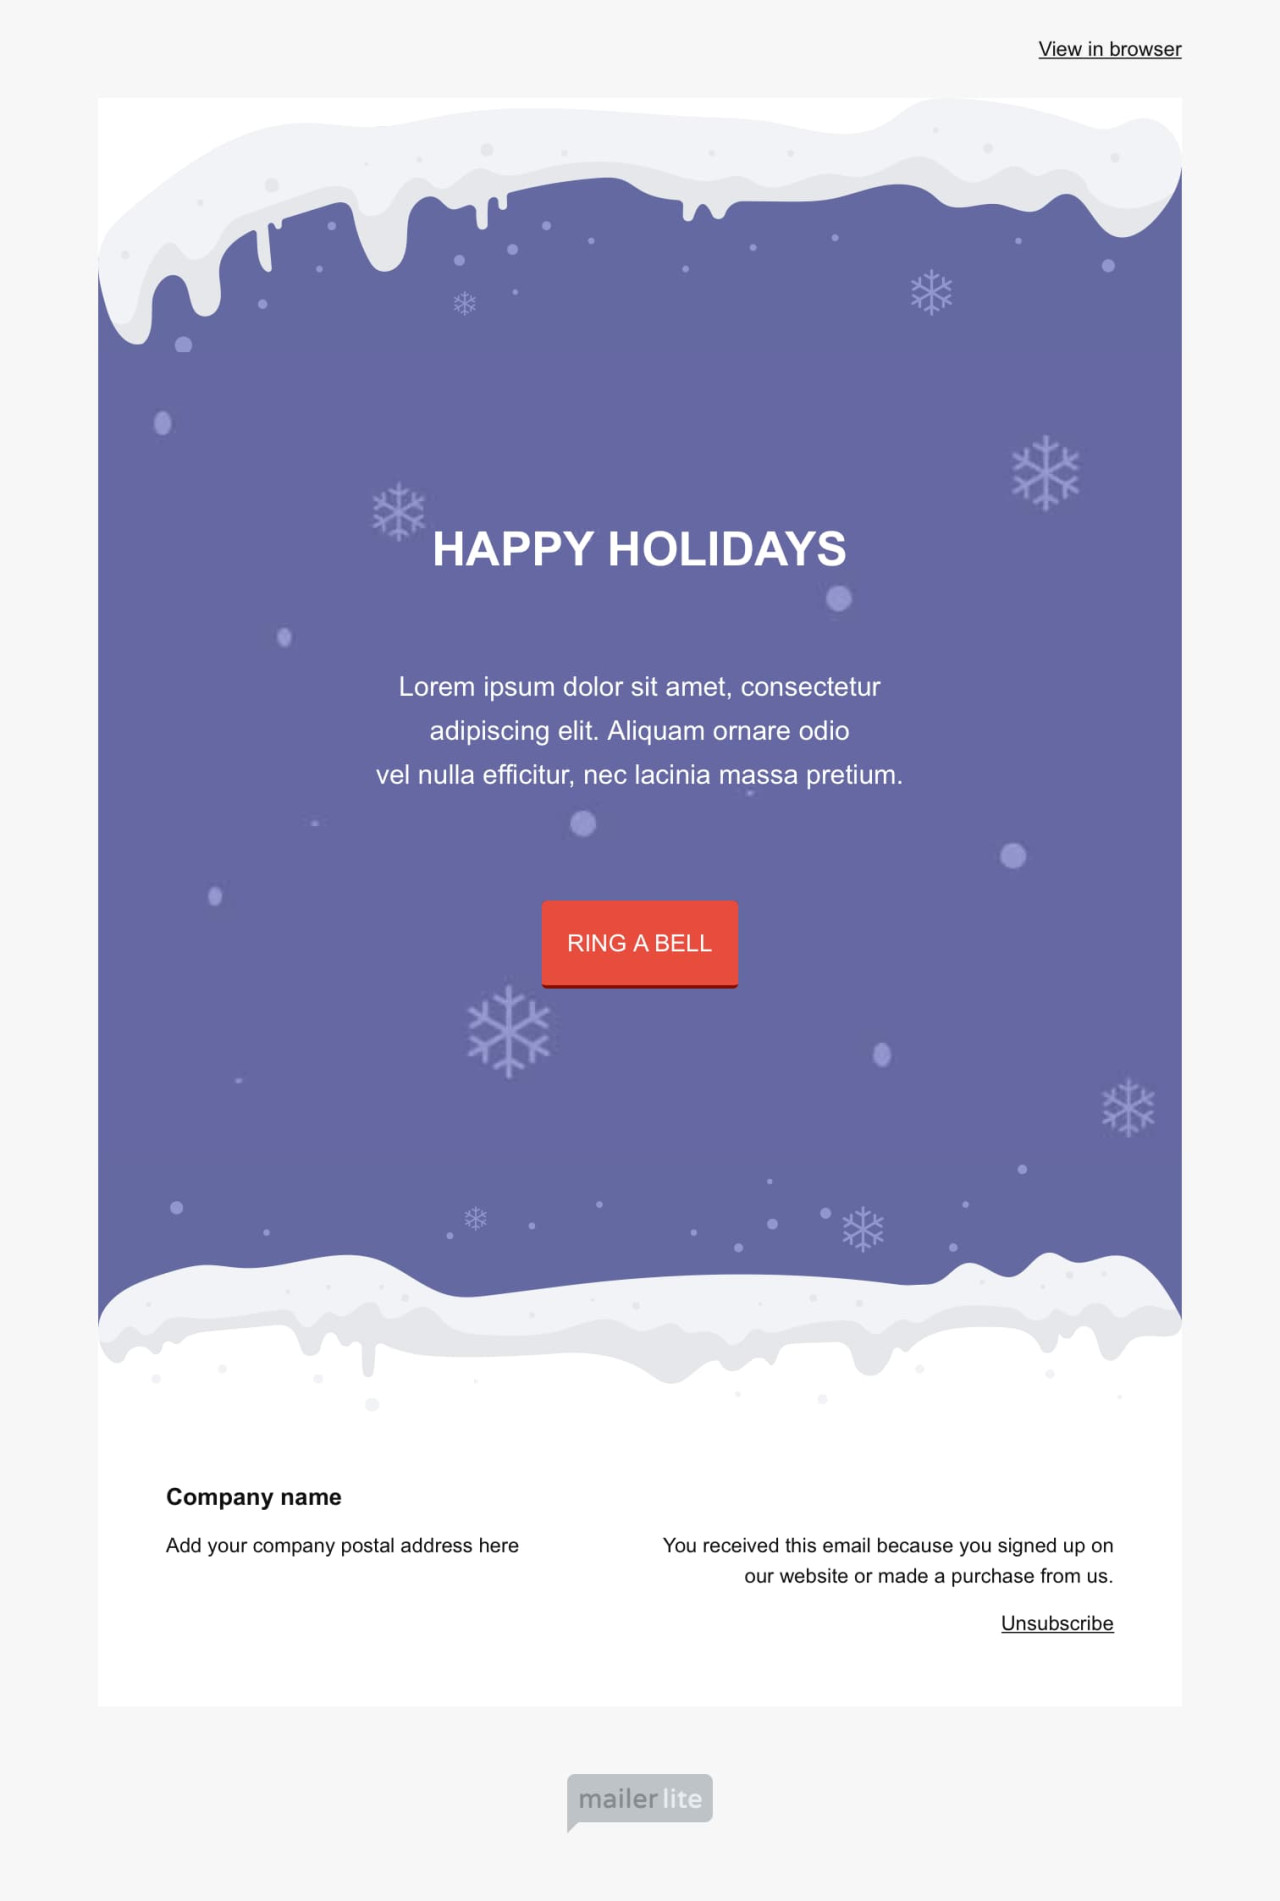 Snowy Christmas greetings template - Made by MailerLite